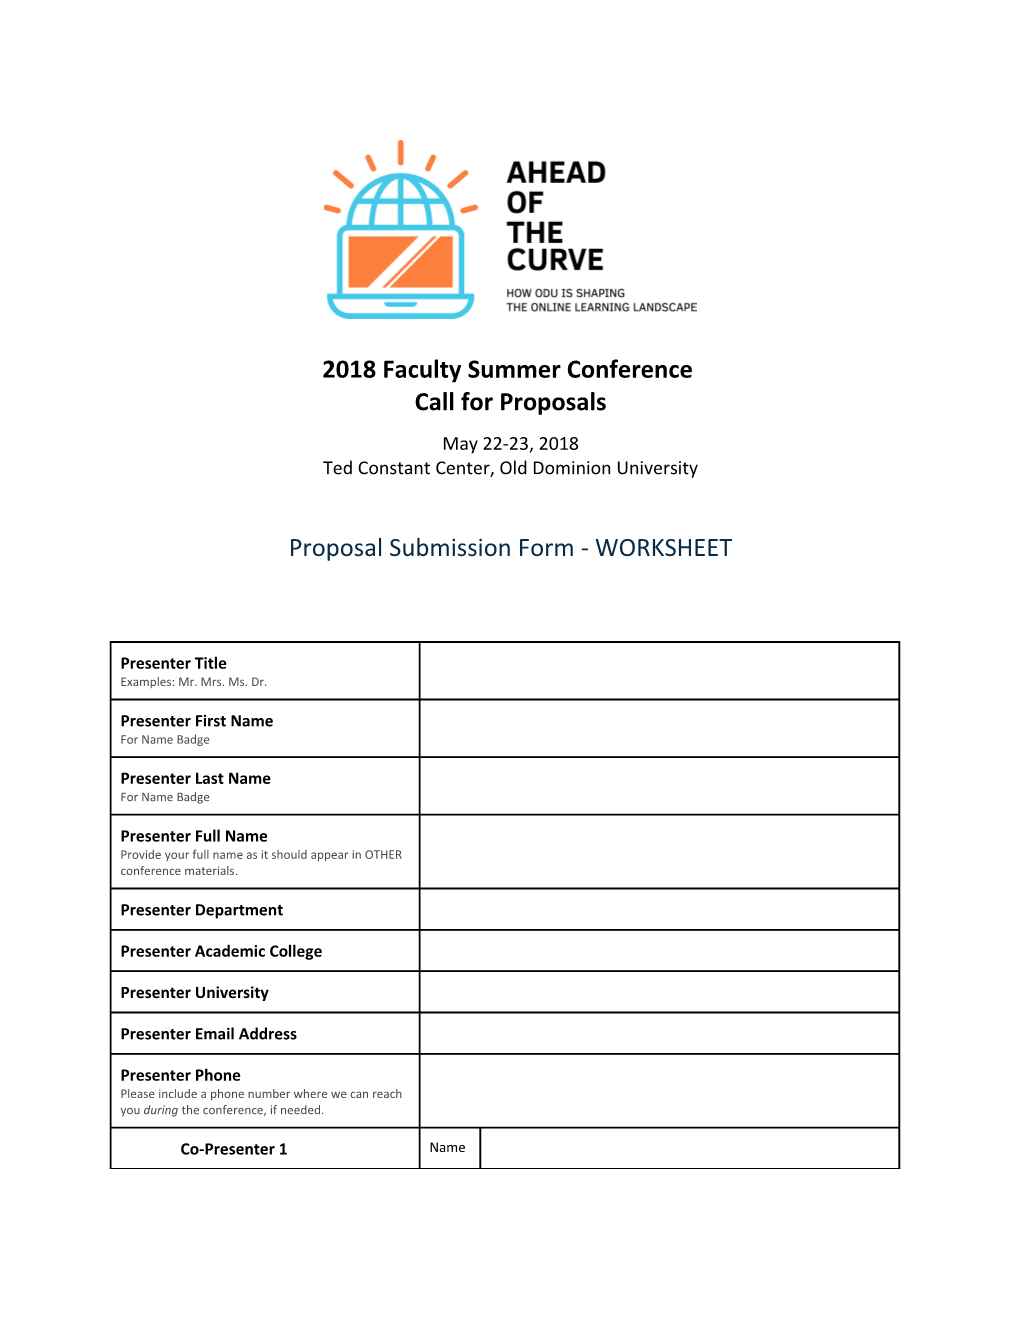 Proposal Submission Form - WORKSHEET2018 Faculty Summer Conference Ahead of the Curve